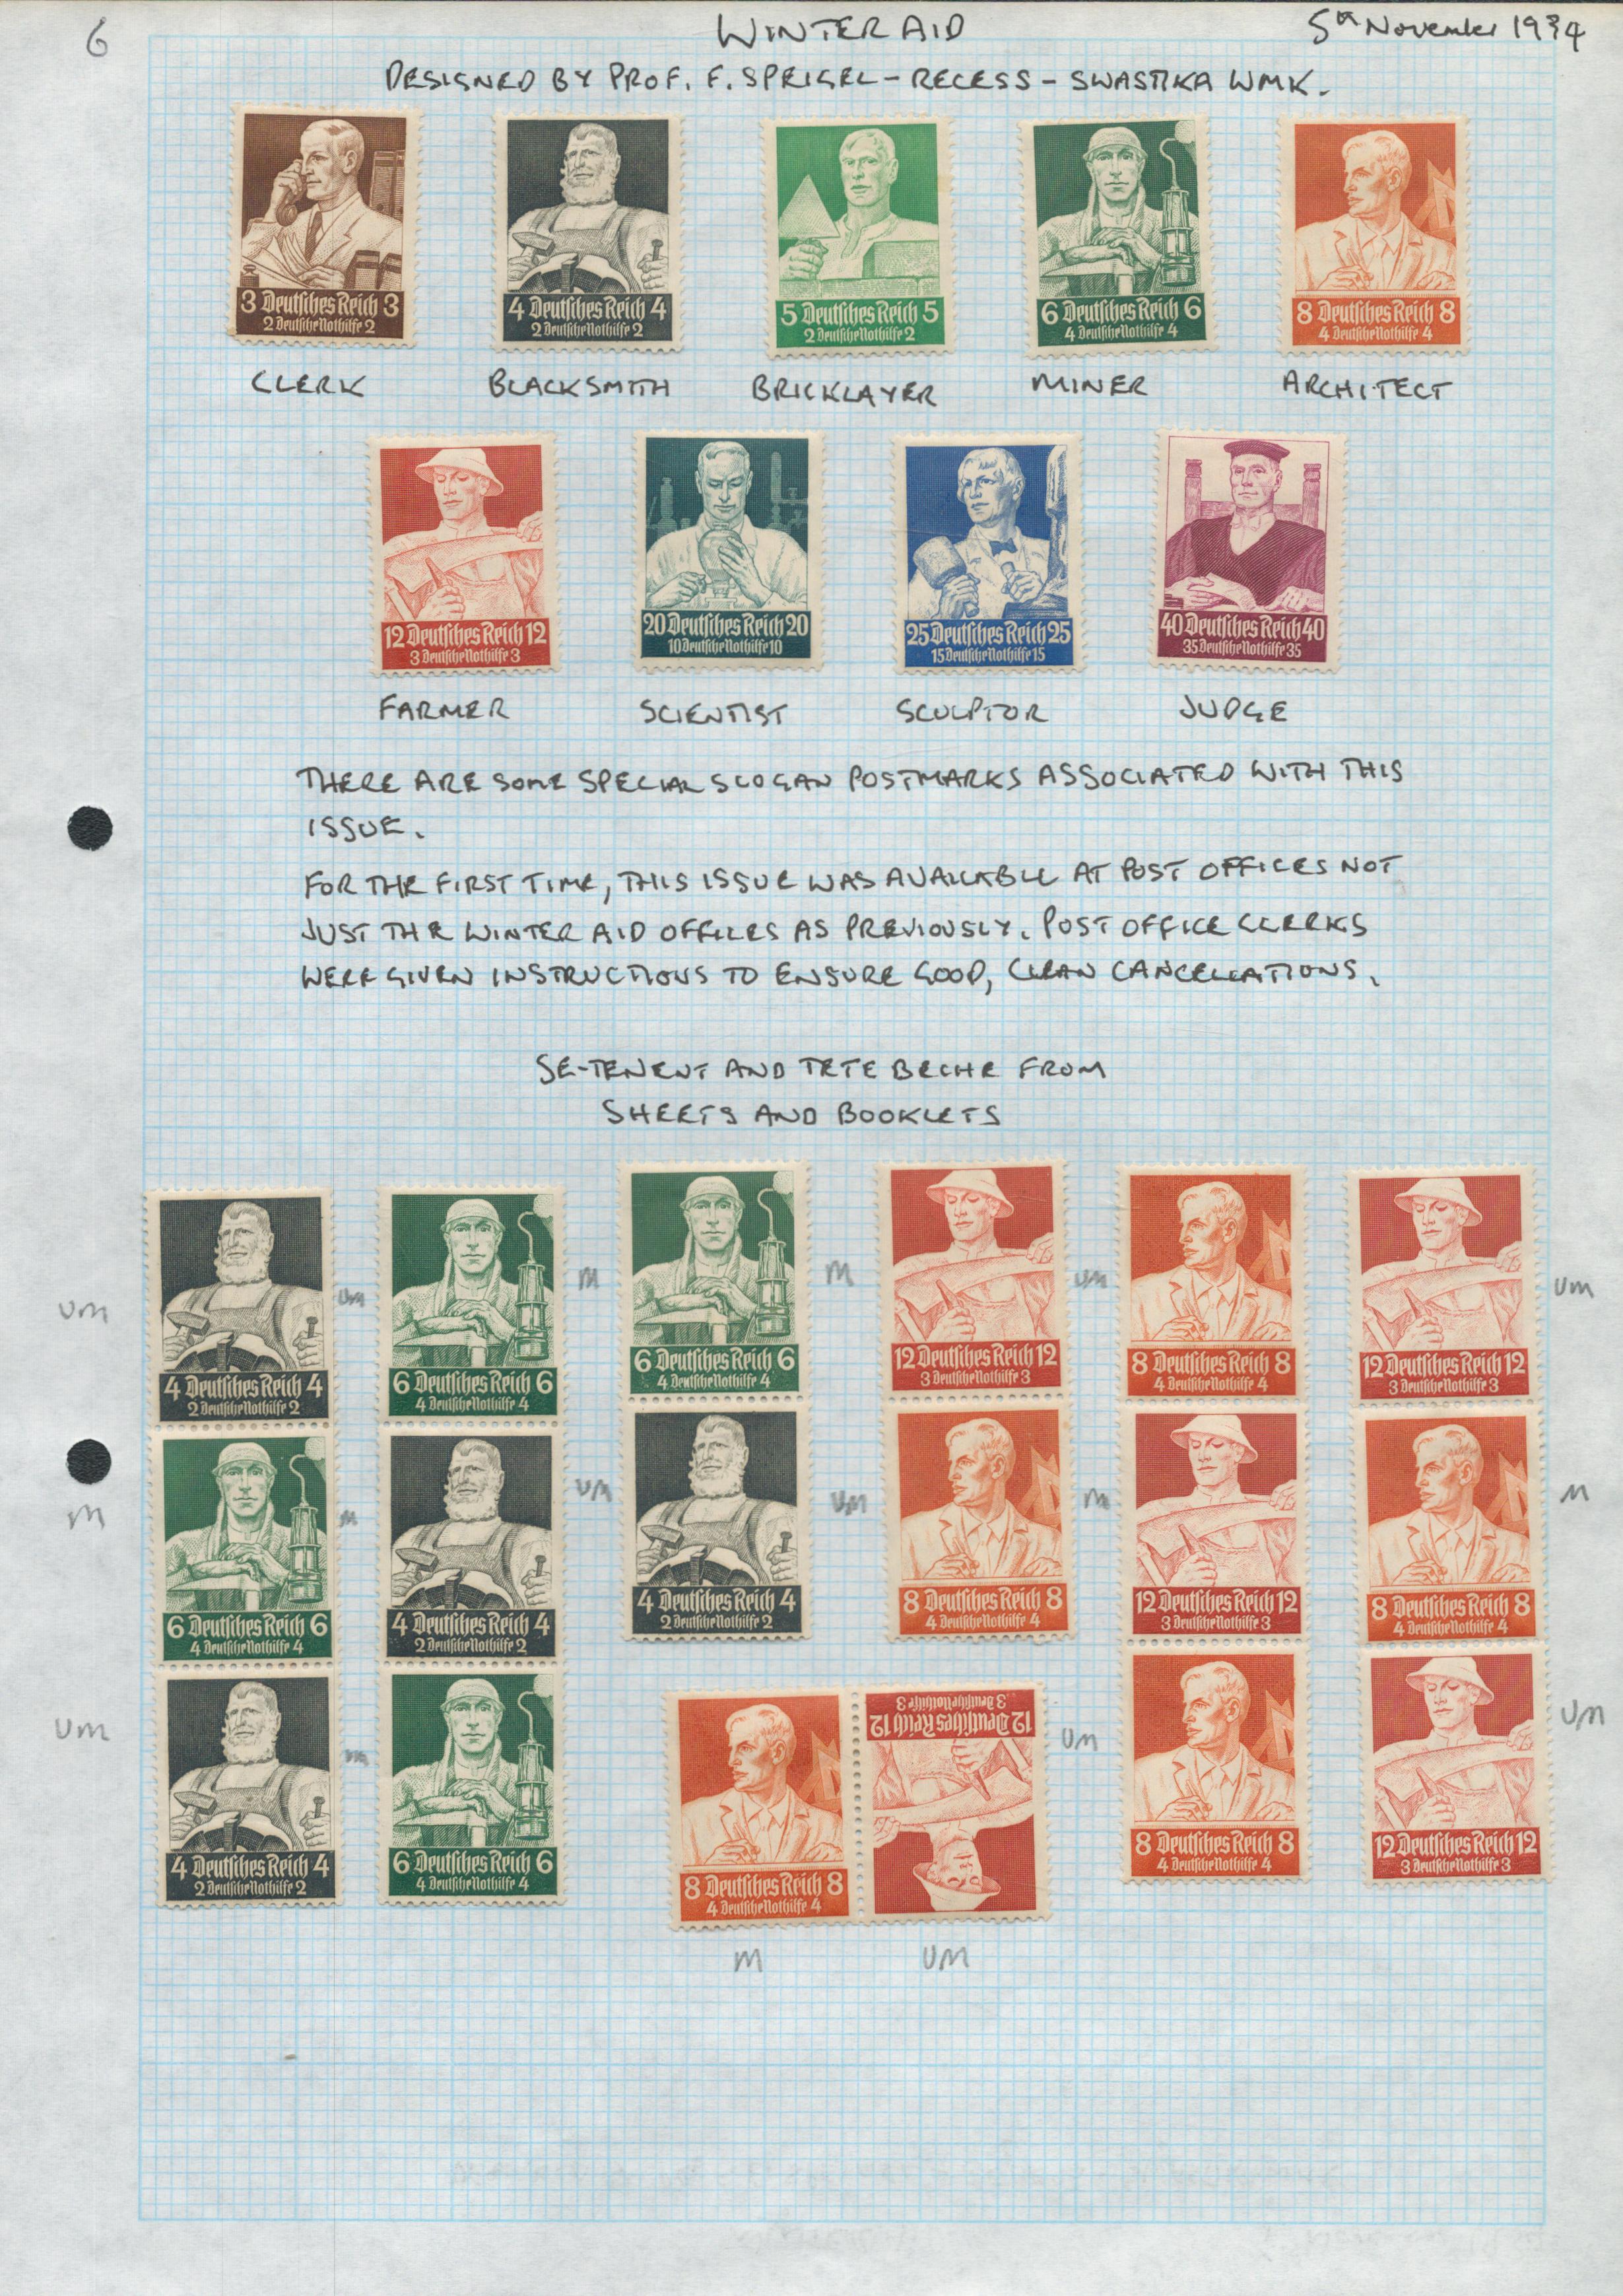 5th November 1934 Winter Aid ( Welfare Fund) Set of 9 Mounted Mint, Also Se- enant and Tete-Beche.